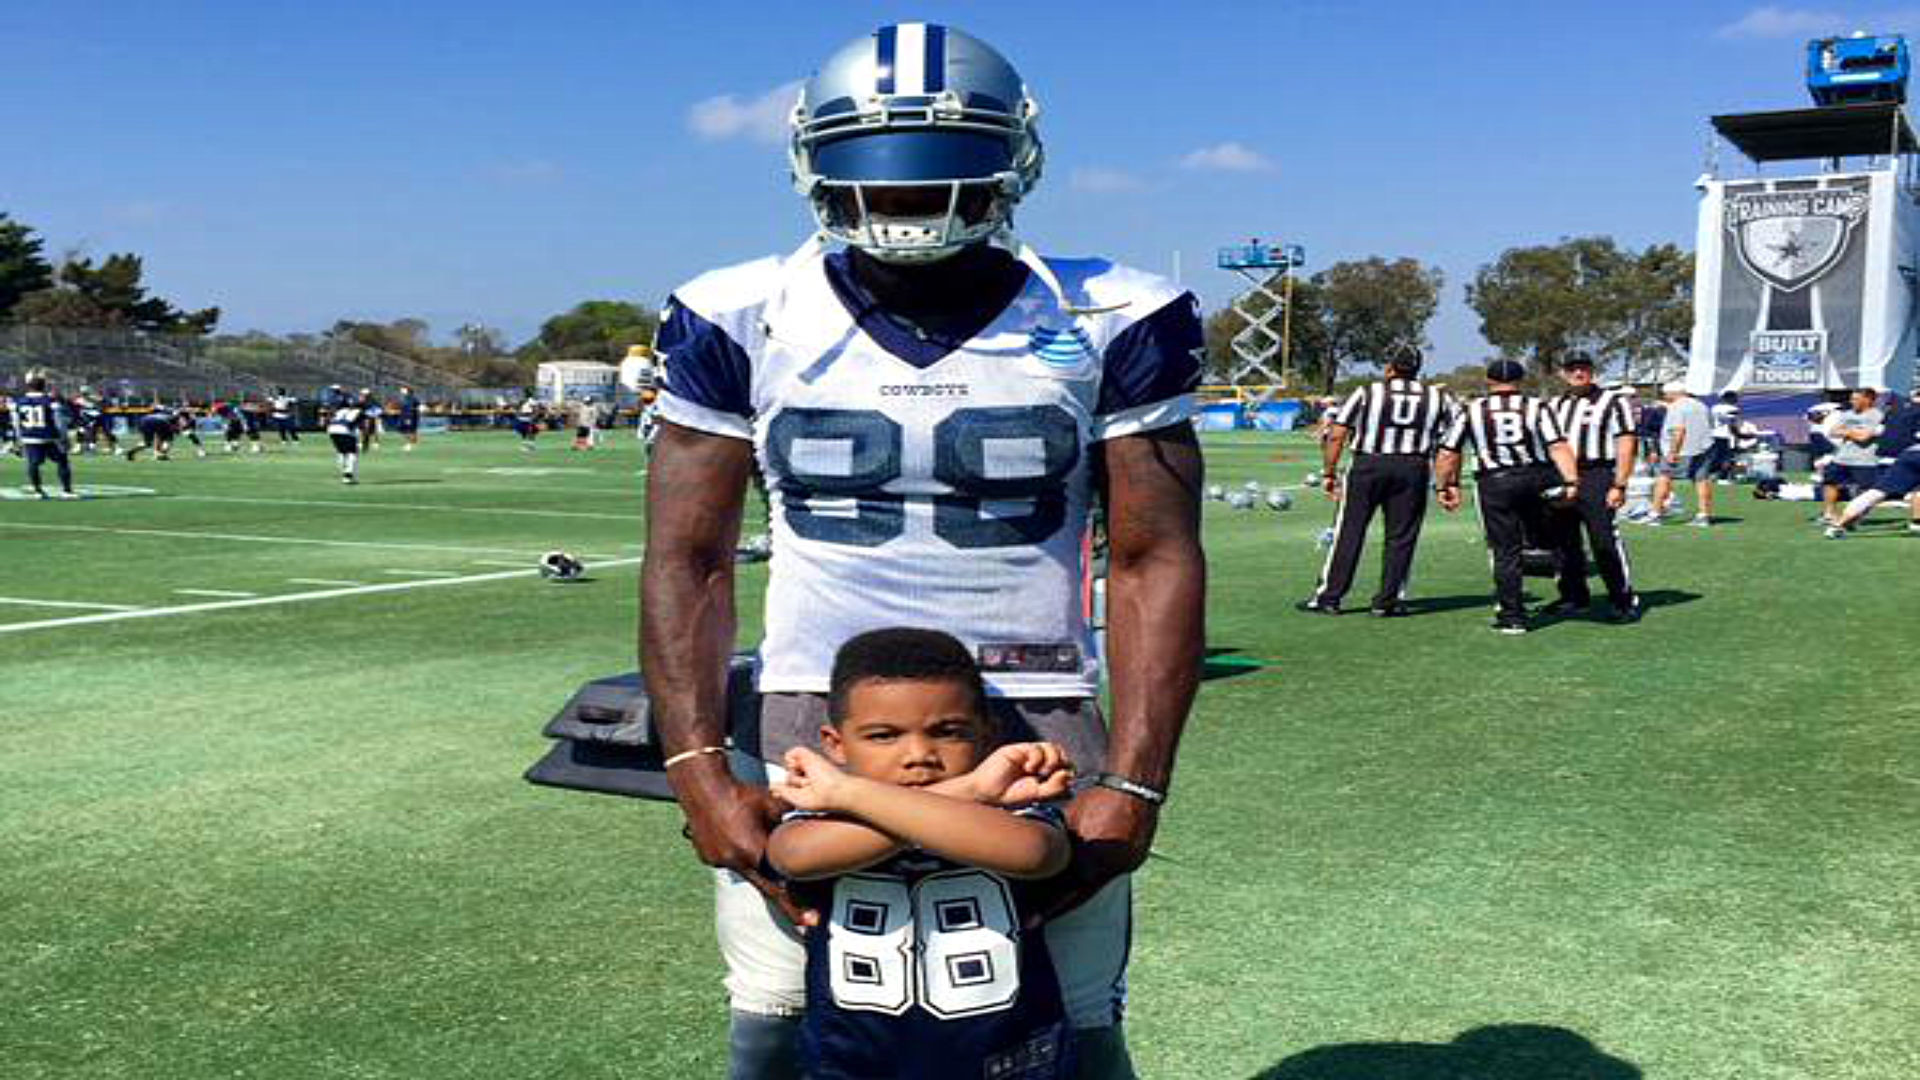 1920x1080 Dez Bryant Jr., a little Cowboy with big game and major cuteness | NFL |  Sporting News